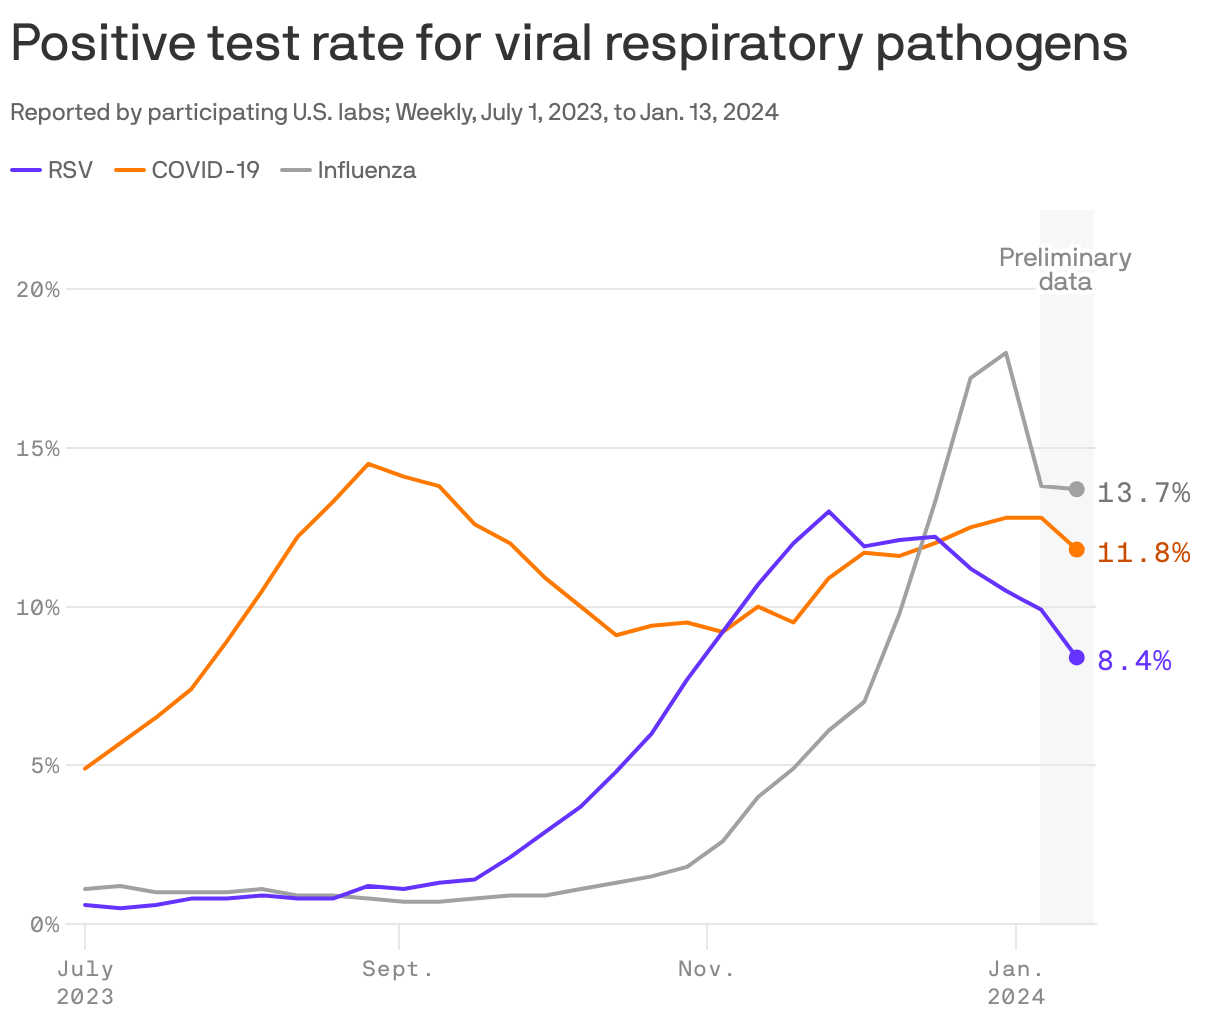 Positive test rate for viral respiratory pathogens